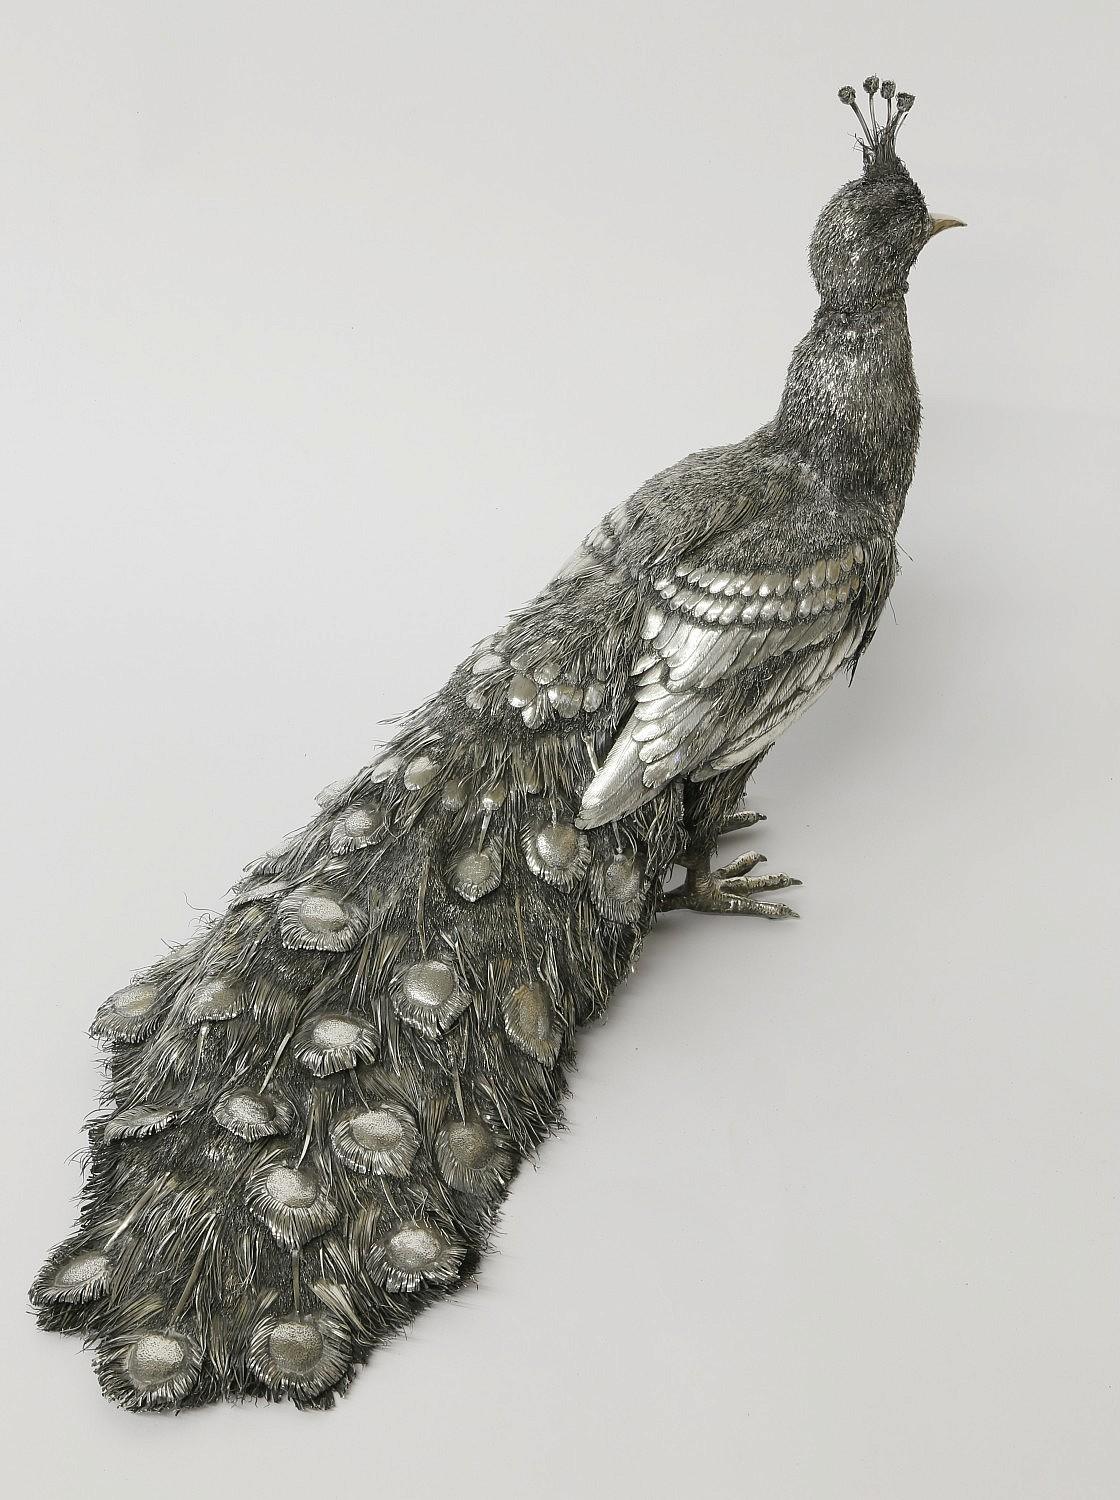 Mario Buccellati, rare and exceptional Italian silver walking peacock, 

circa 1970.
Signed Buccellati Italy.

Measures: Height 17 inches 
Length 22 inches
Width 11 inches.

Very fine quality and workmanship and very large in size.

The only one